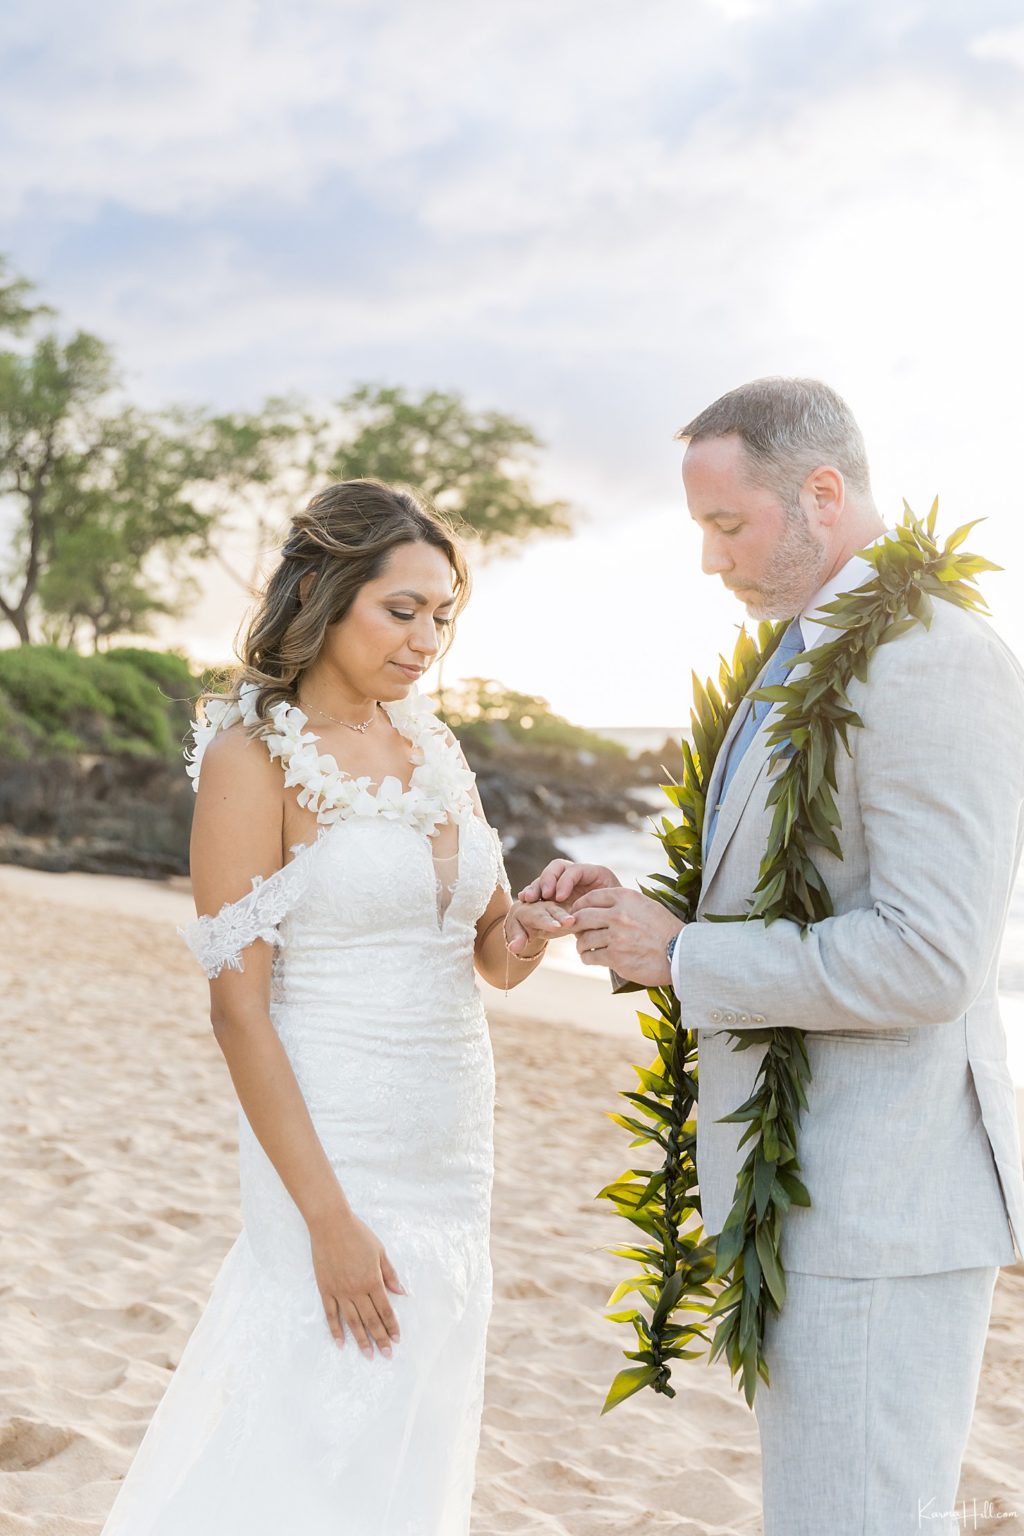 There Was You - Abigail & David's Maui Elopement